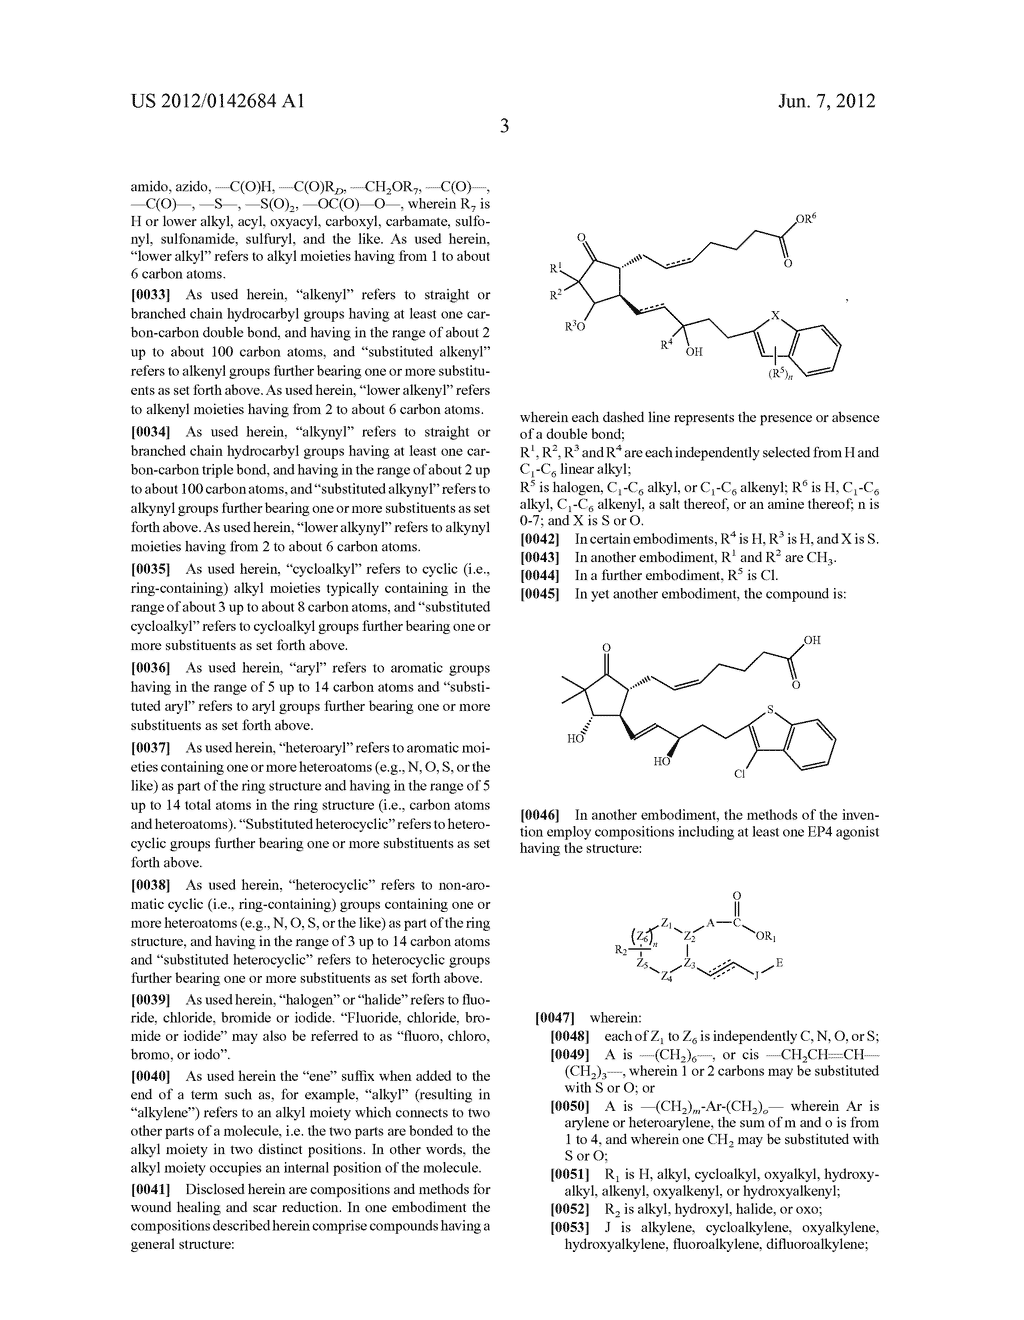 COMPOUNDS AND METHODS FOR SKIN REPAIR - diagram, schematic, and image 10